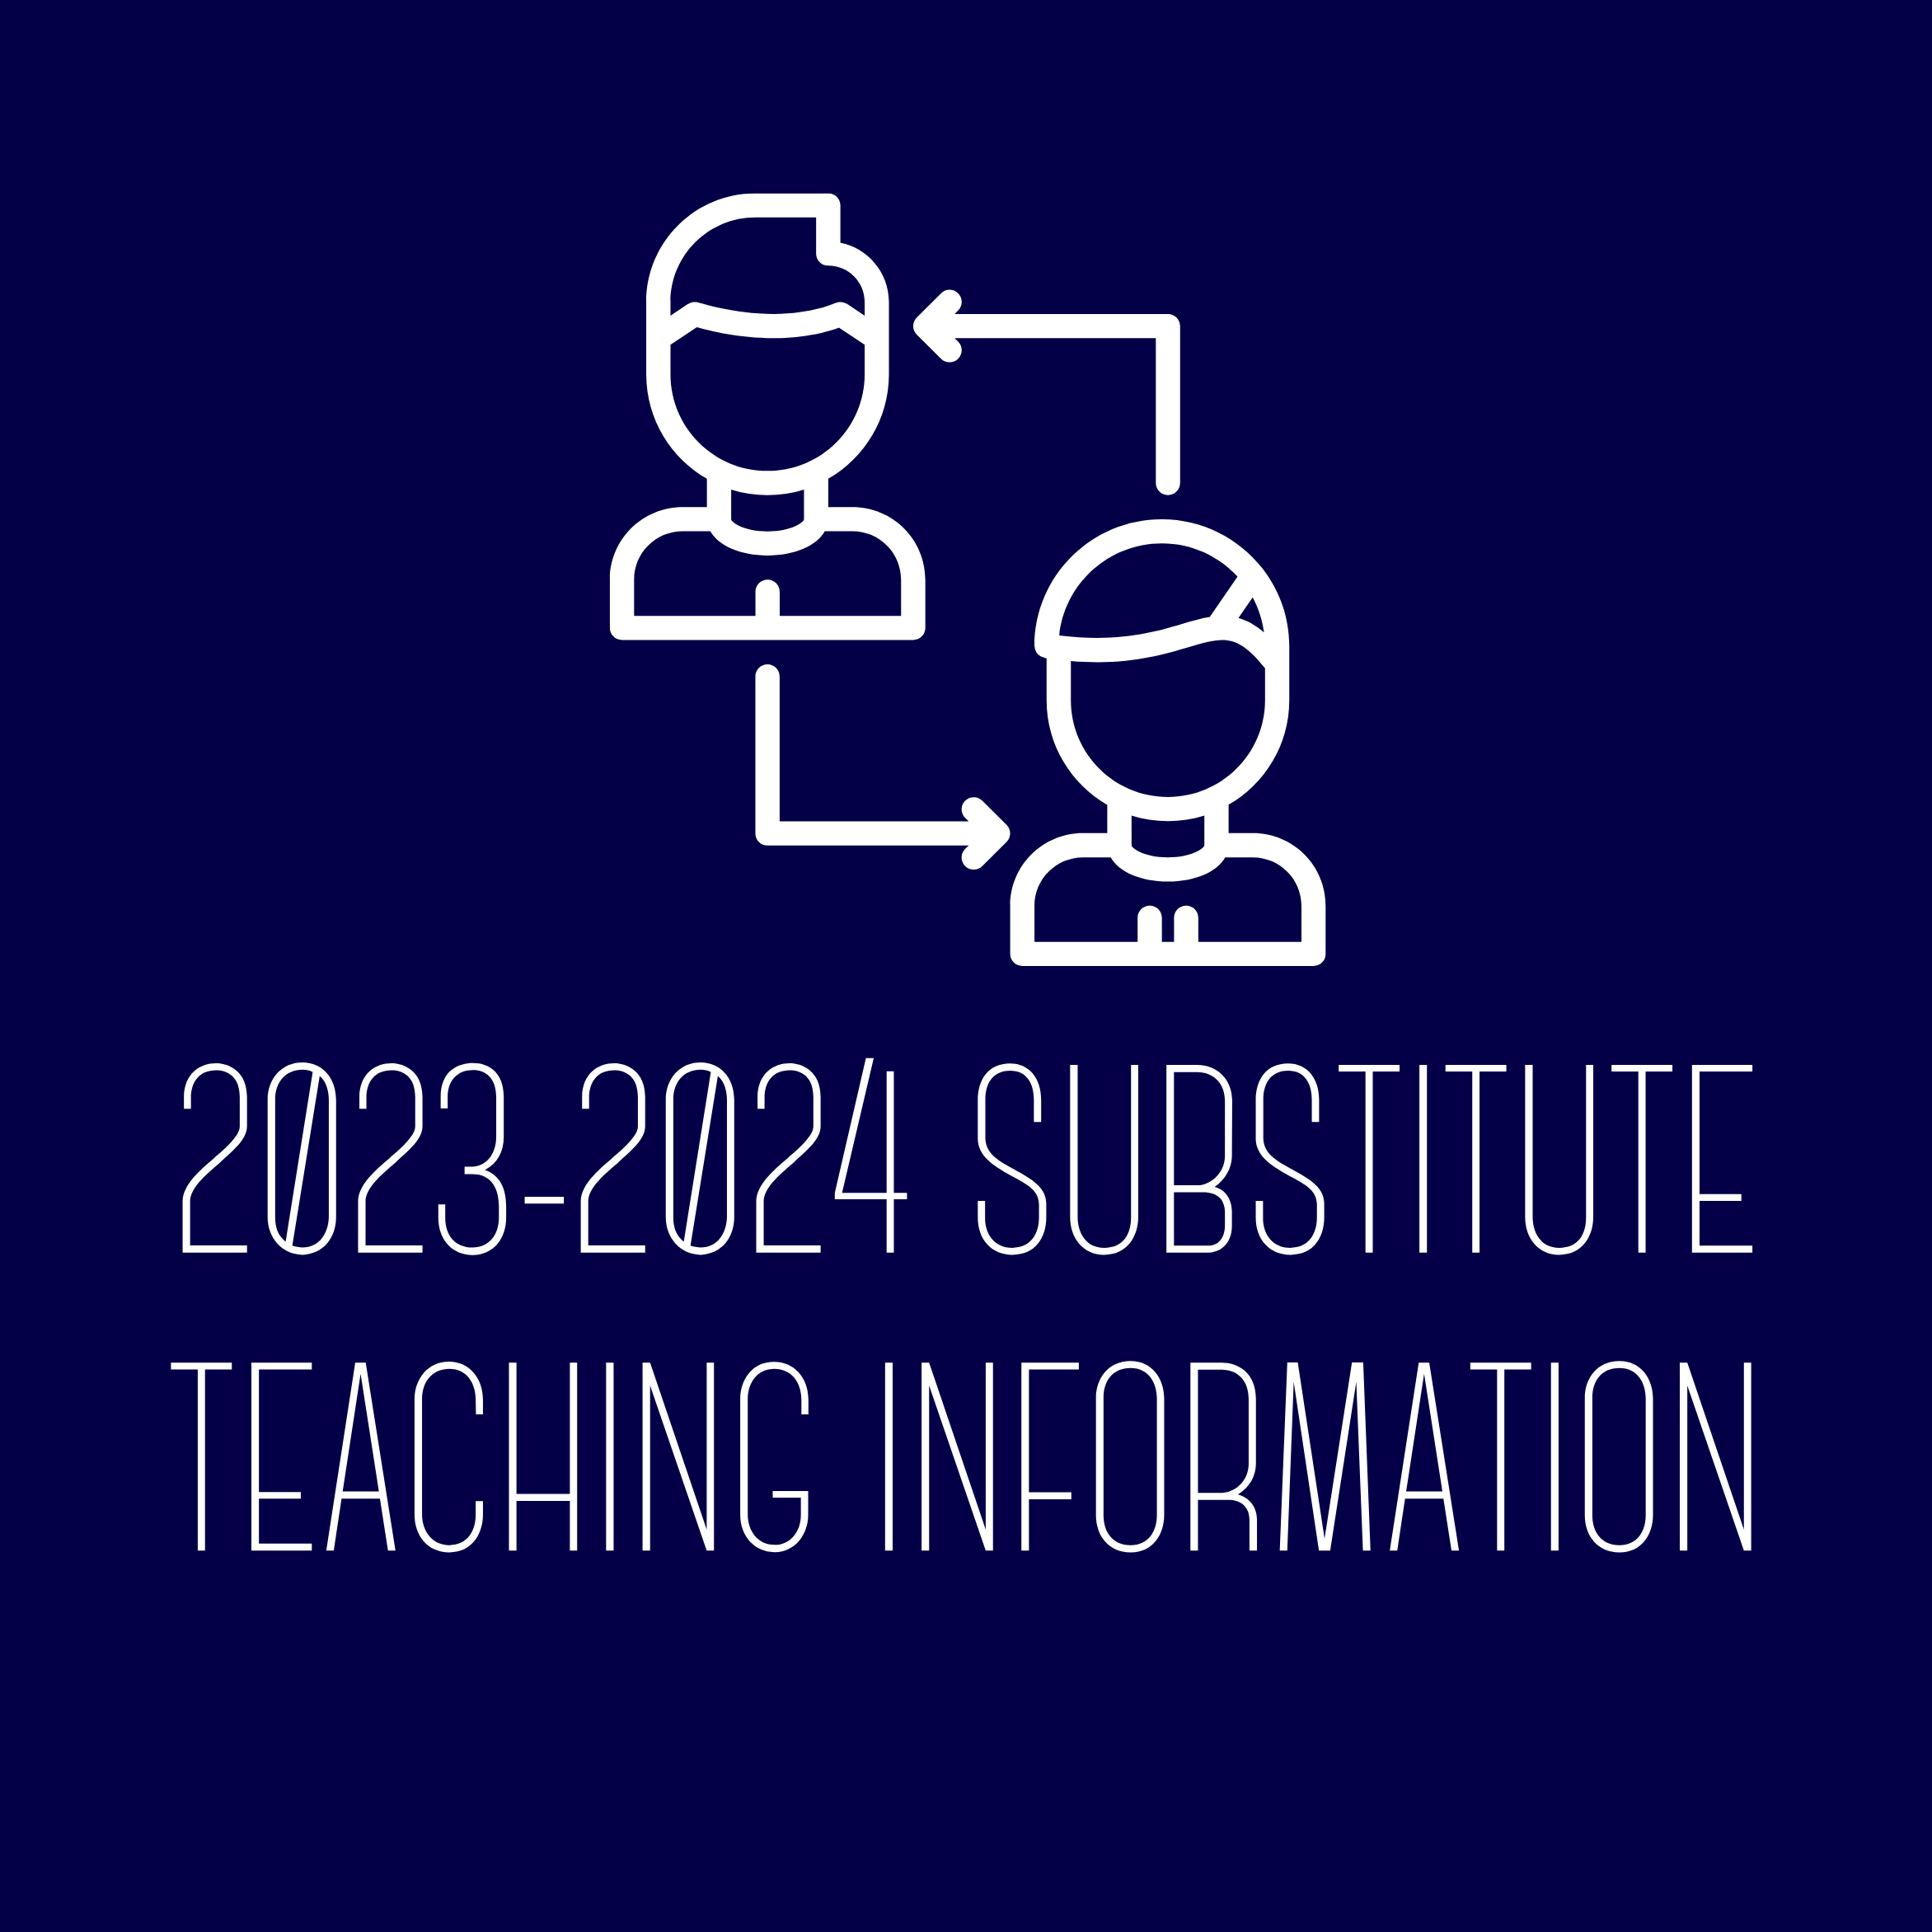 2023-2024 Substitute Teaching information